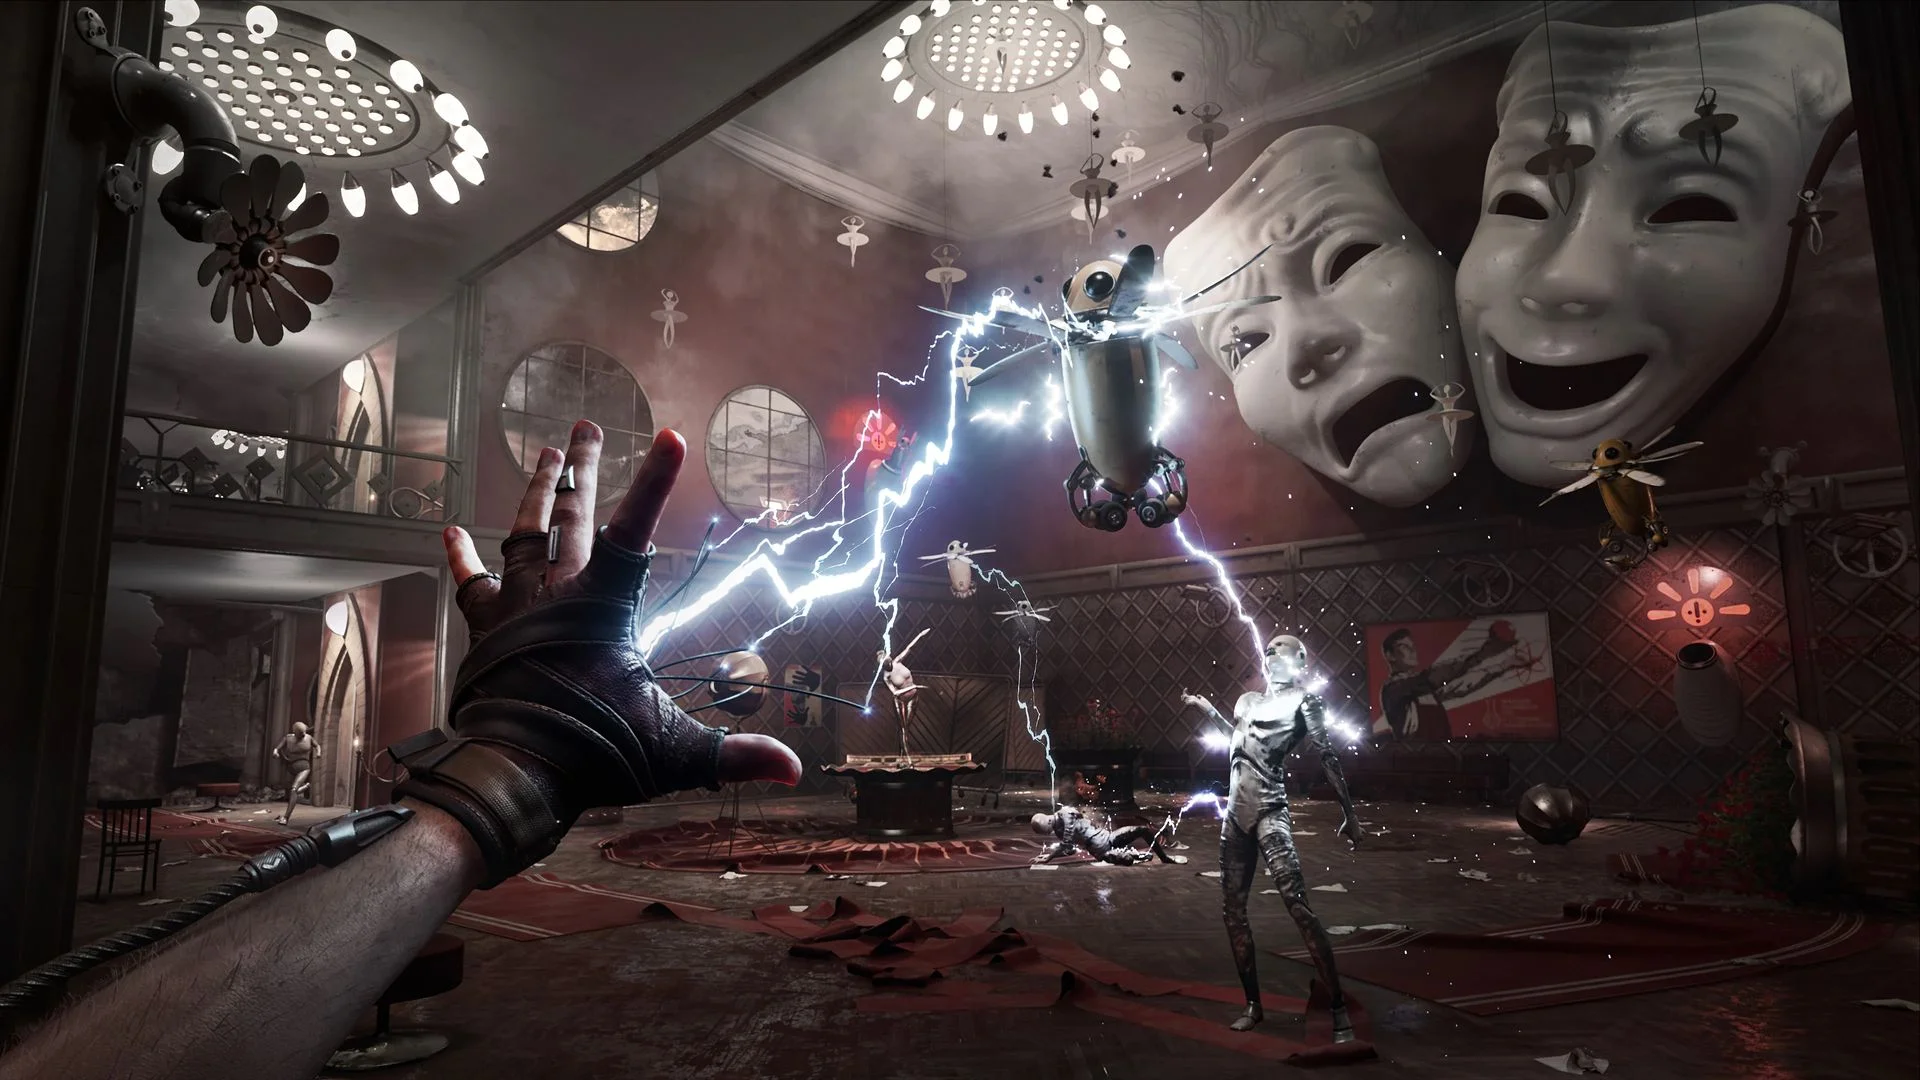 The developers of Atomic Heart showed the third DLC